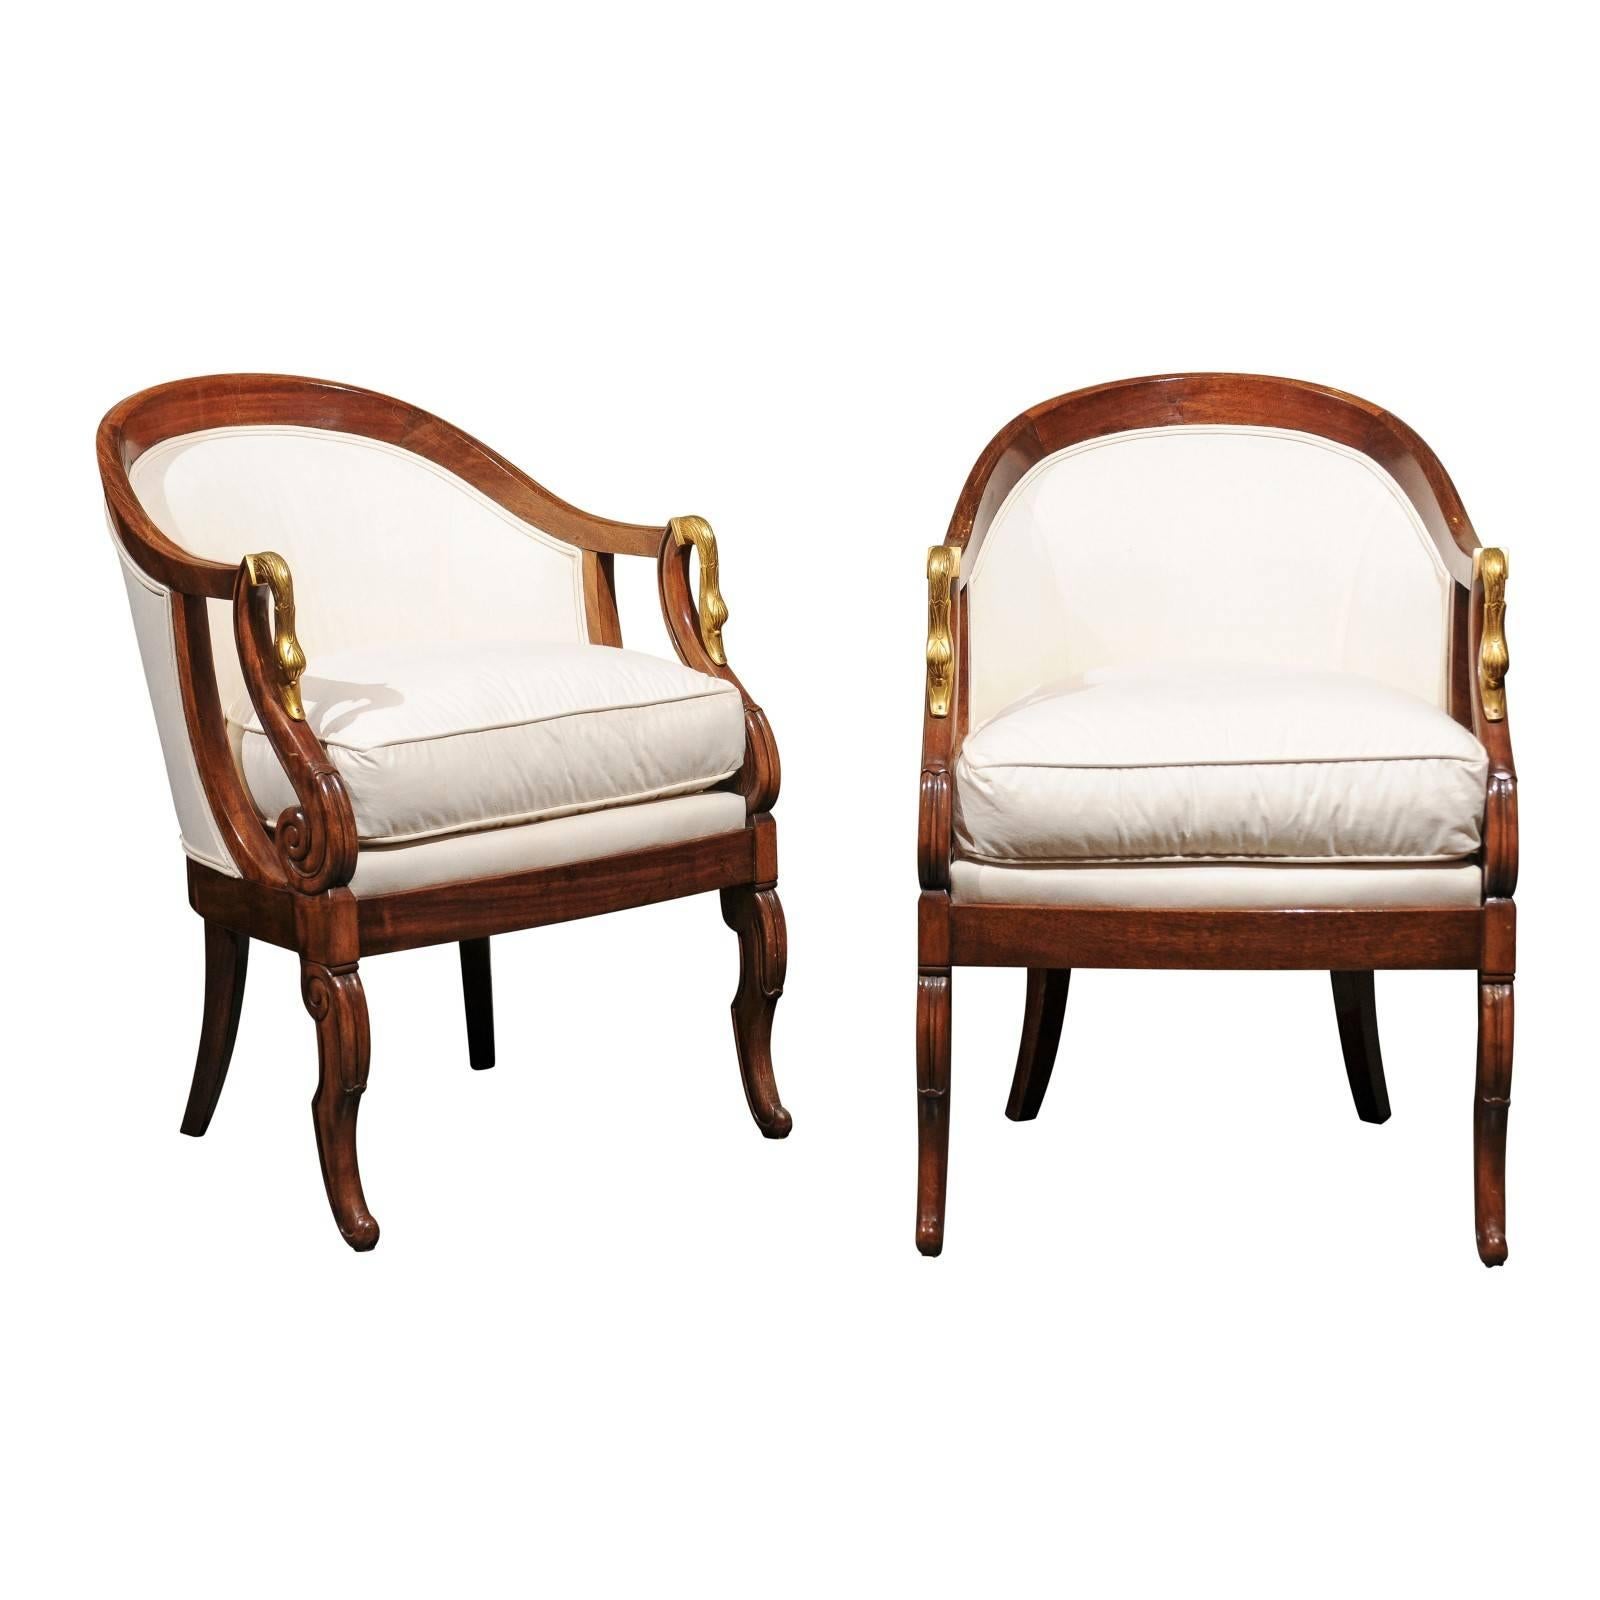 Pair of French Empire Style Tub Chairs with Brass Swan Motifs from the 1870s